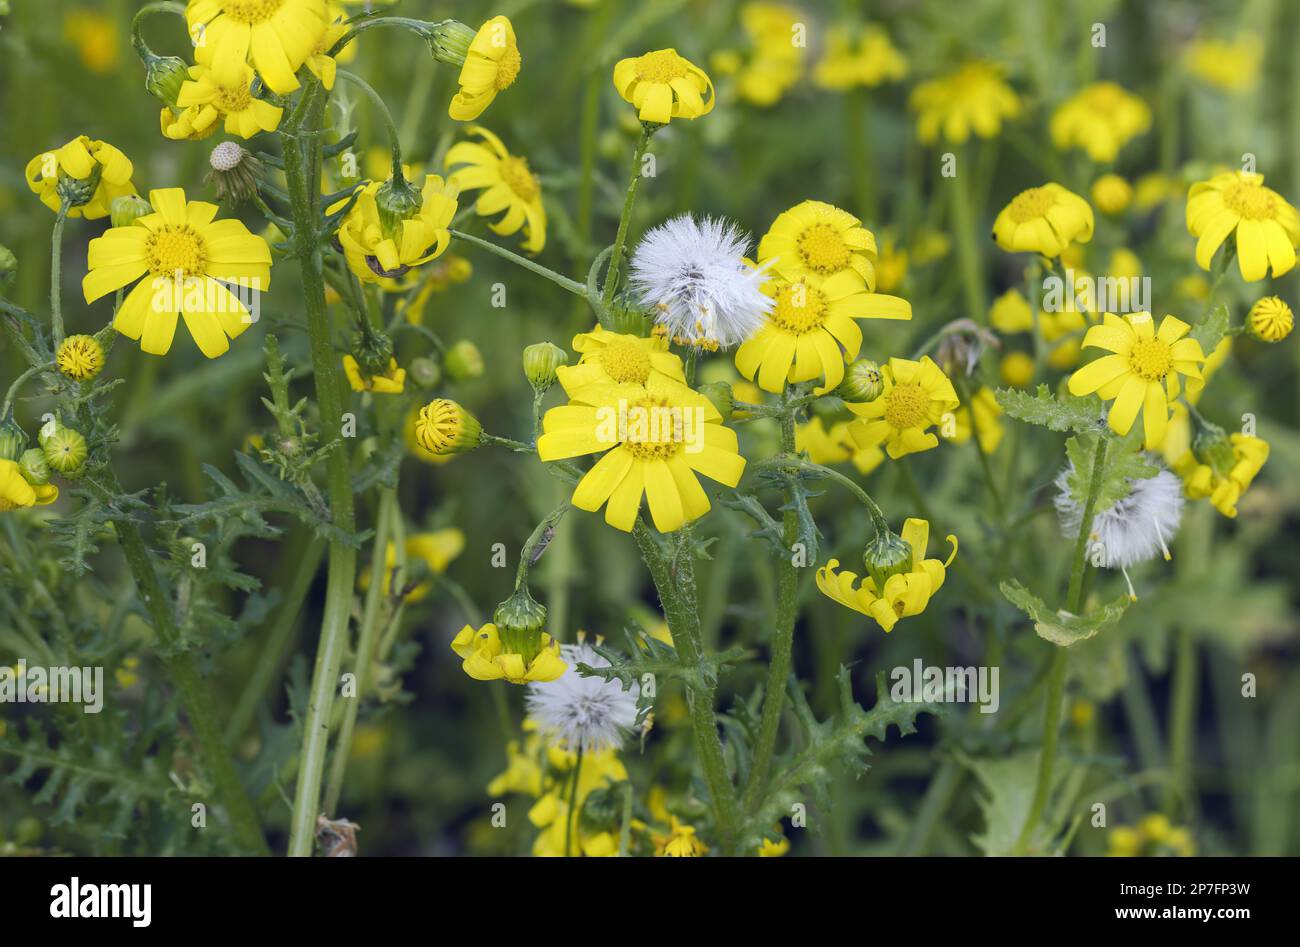 Yellow and white wild flowers close up against green grass in Northern Israel Stock Photo